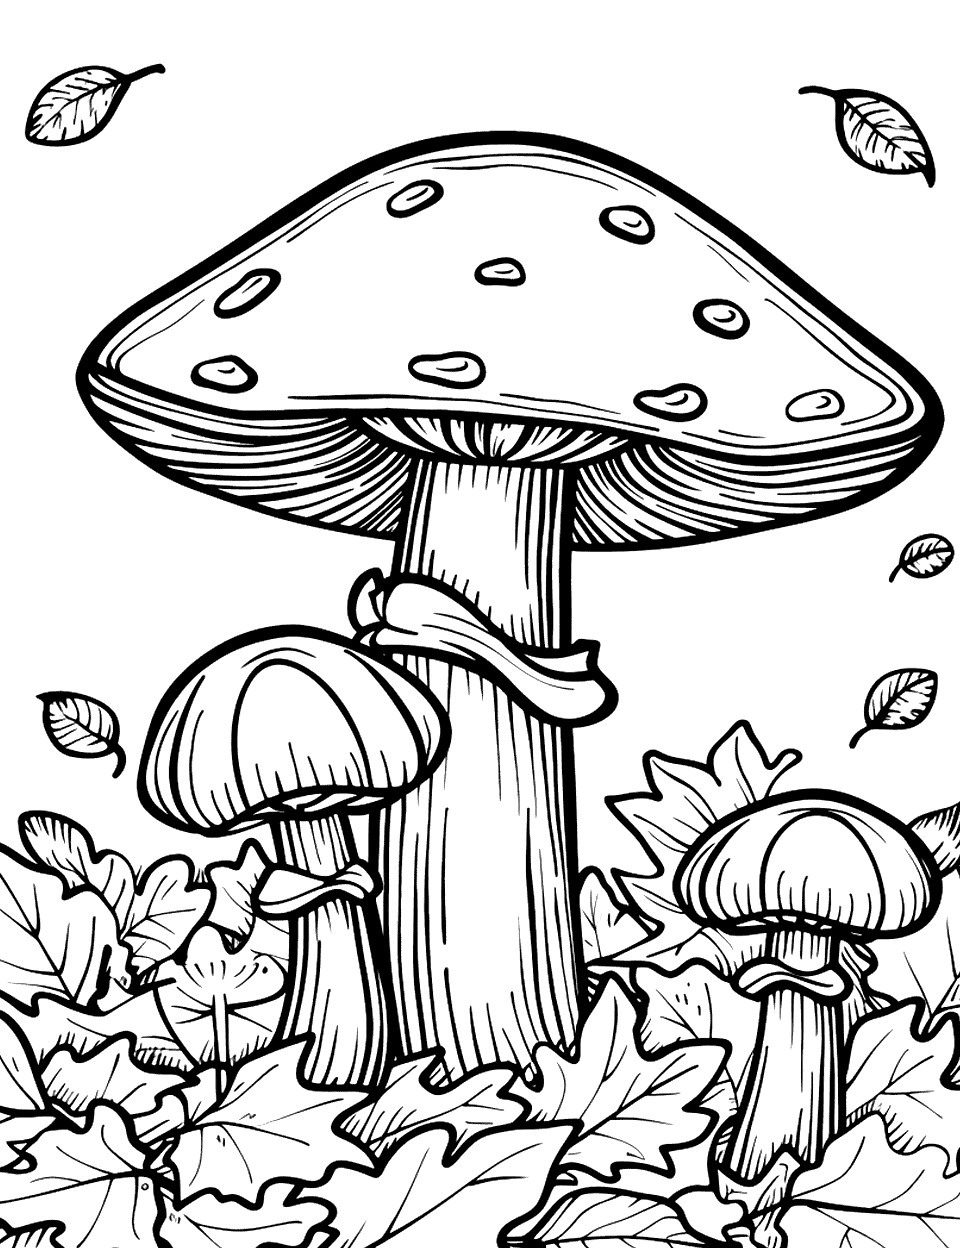 Fungi and Fallen Leaves Mushroom Coloring Page - Mushrooms peek out among a carpet of fallen leaves.